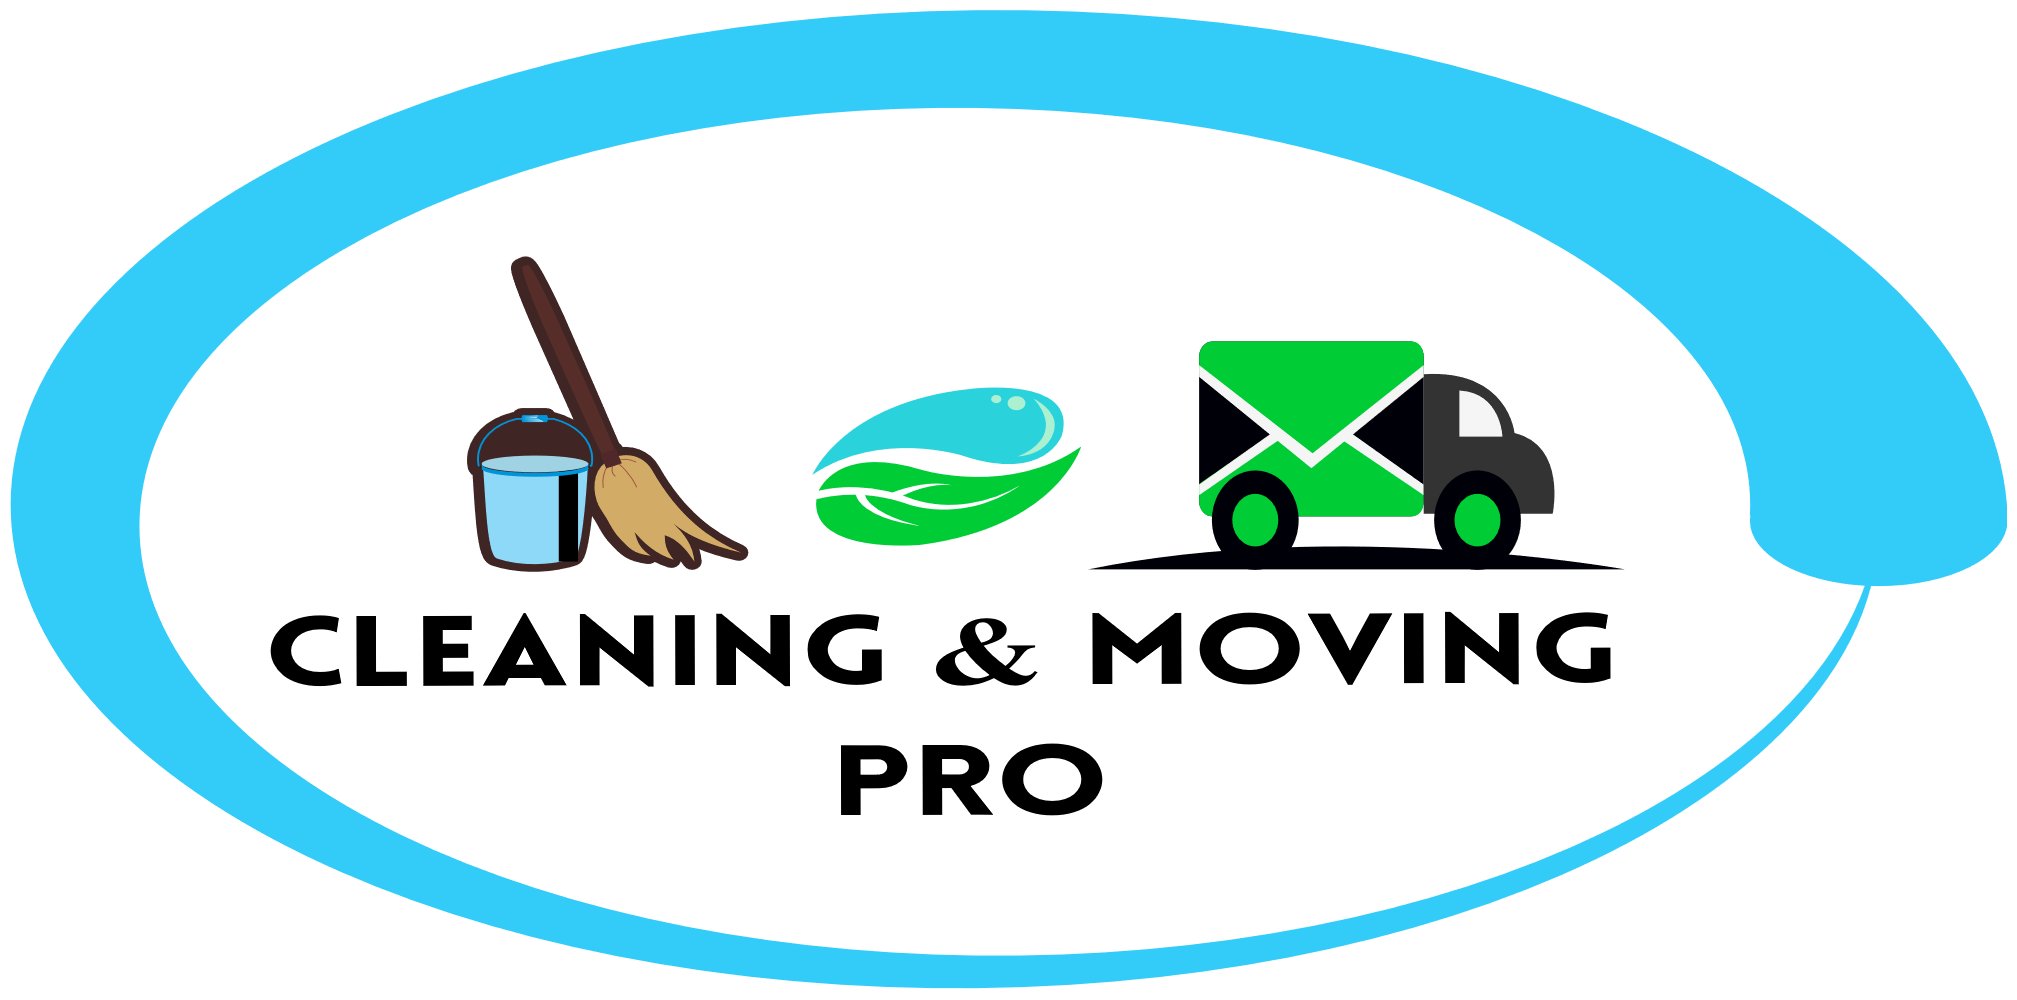 Cleaning Company Galway / Cleaning Company Dublin / Professional Cleaning Services / Commercial Cleaning / Office cleaning.-CLEANING AND MOVING PRO